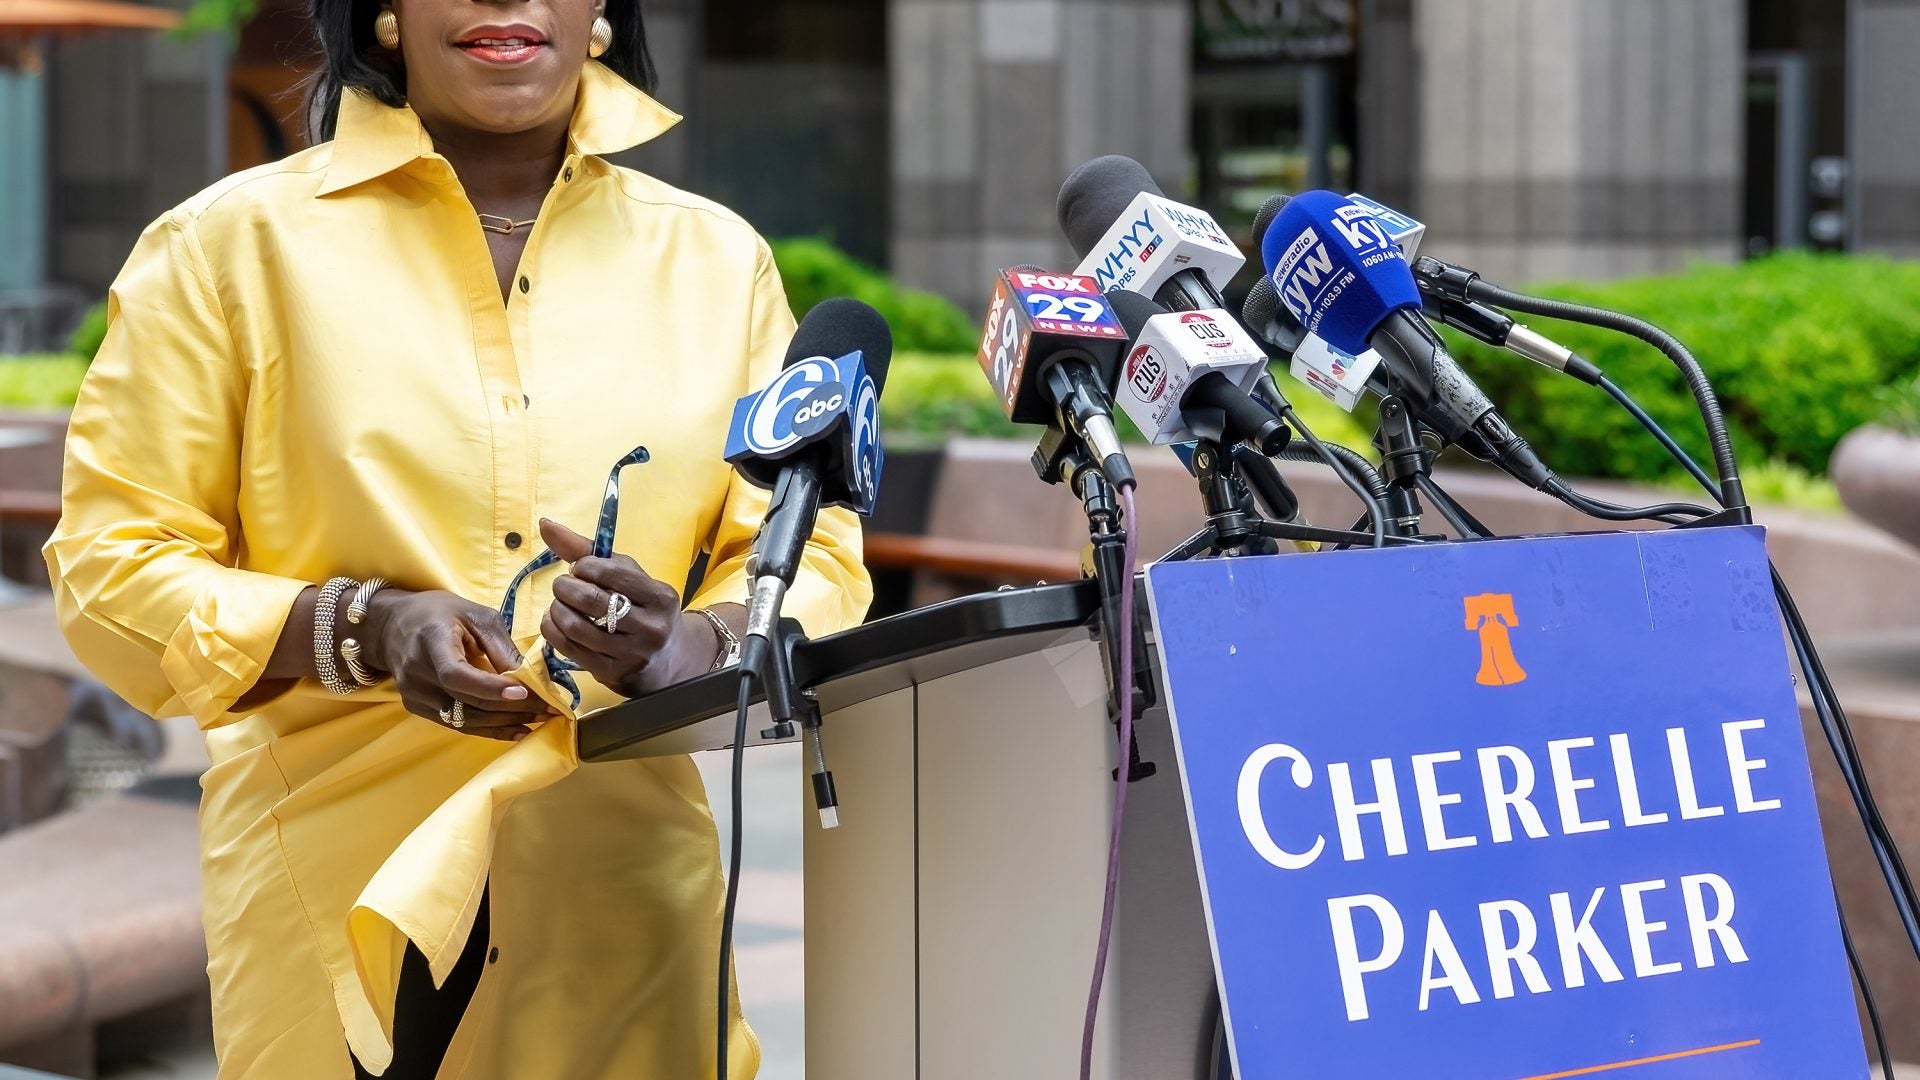 Cherelle Parker Makes History As The First Woman Elected Mayor Of Philadelphia